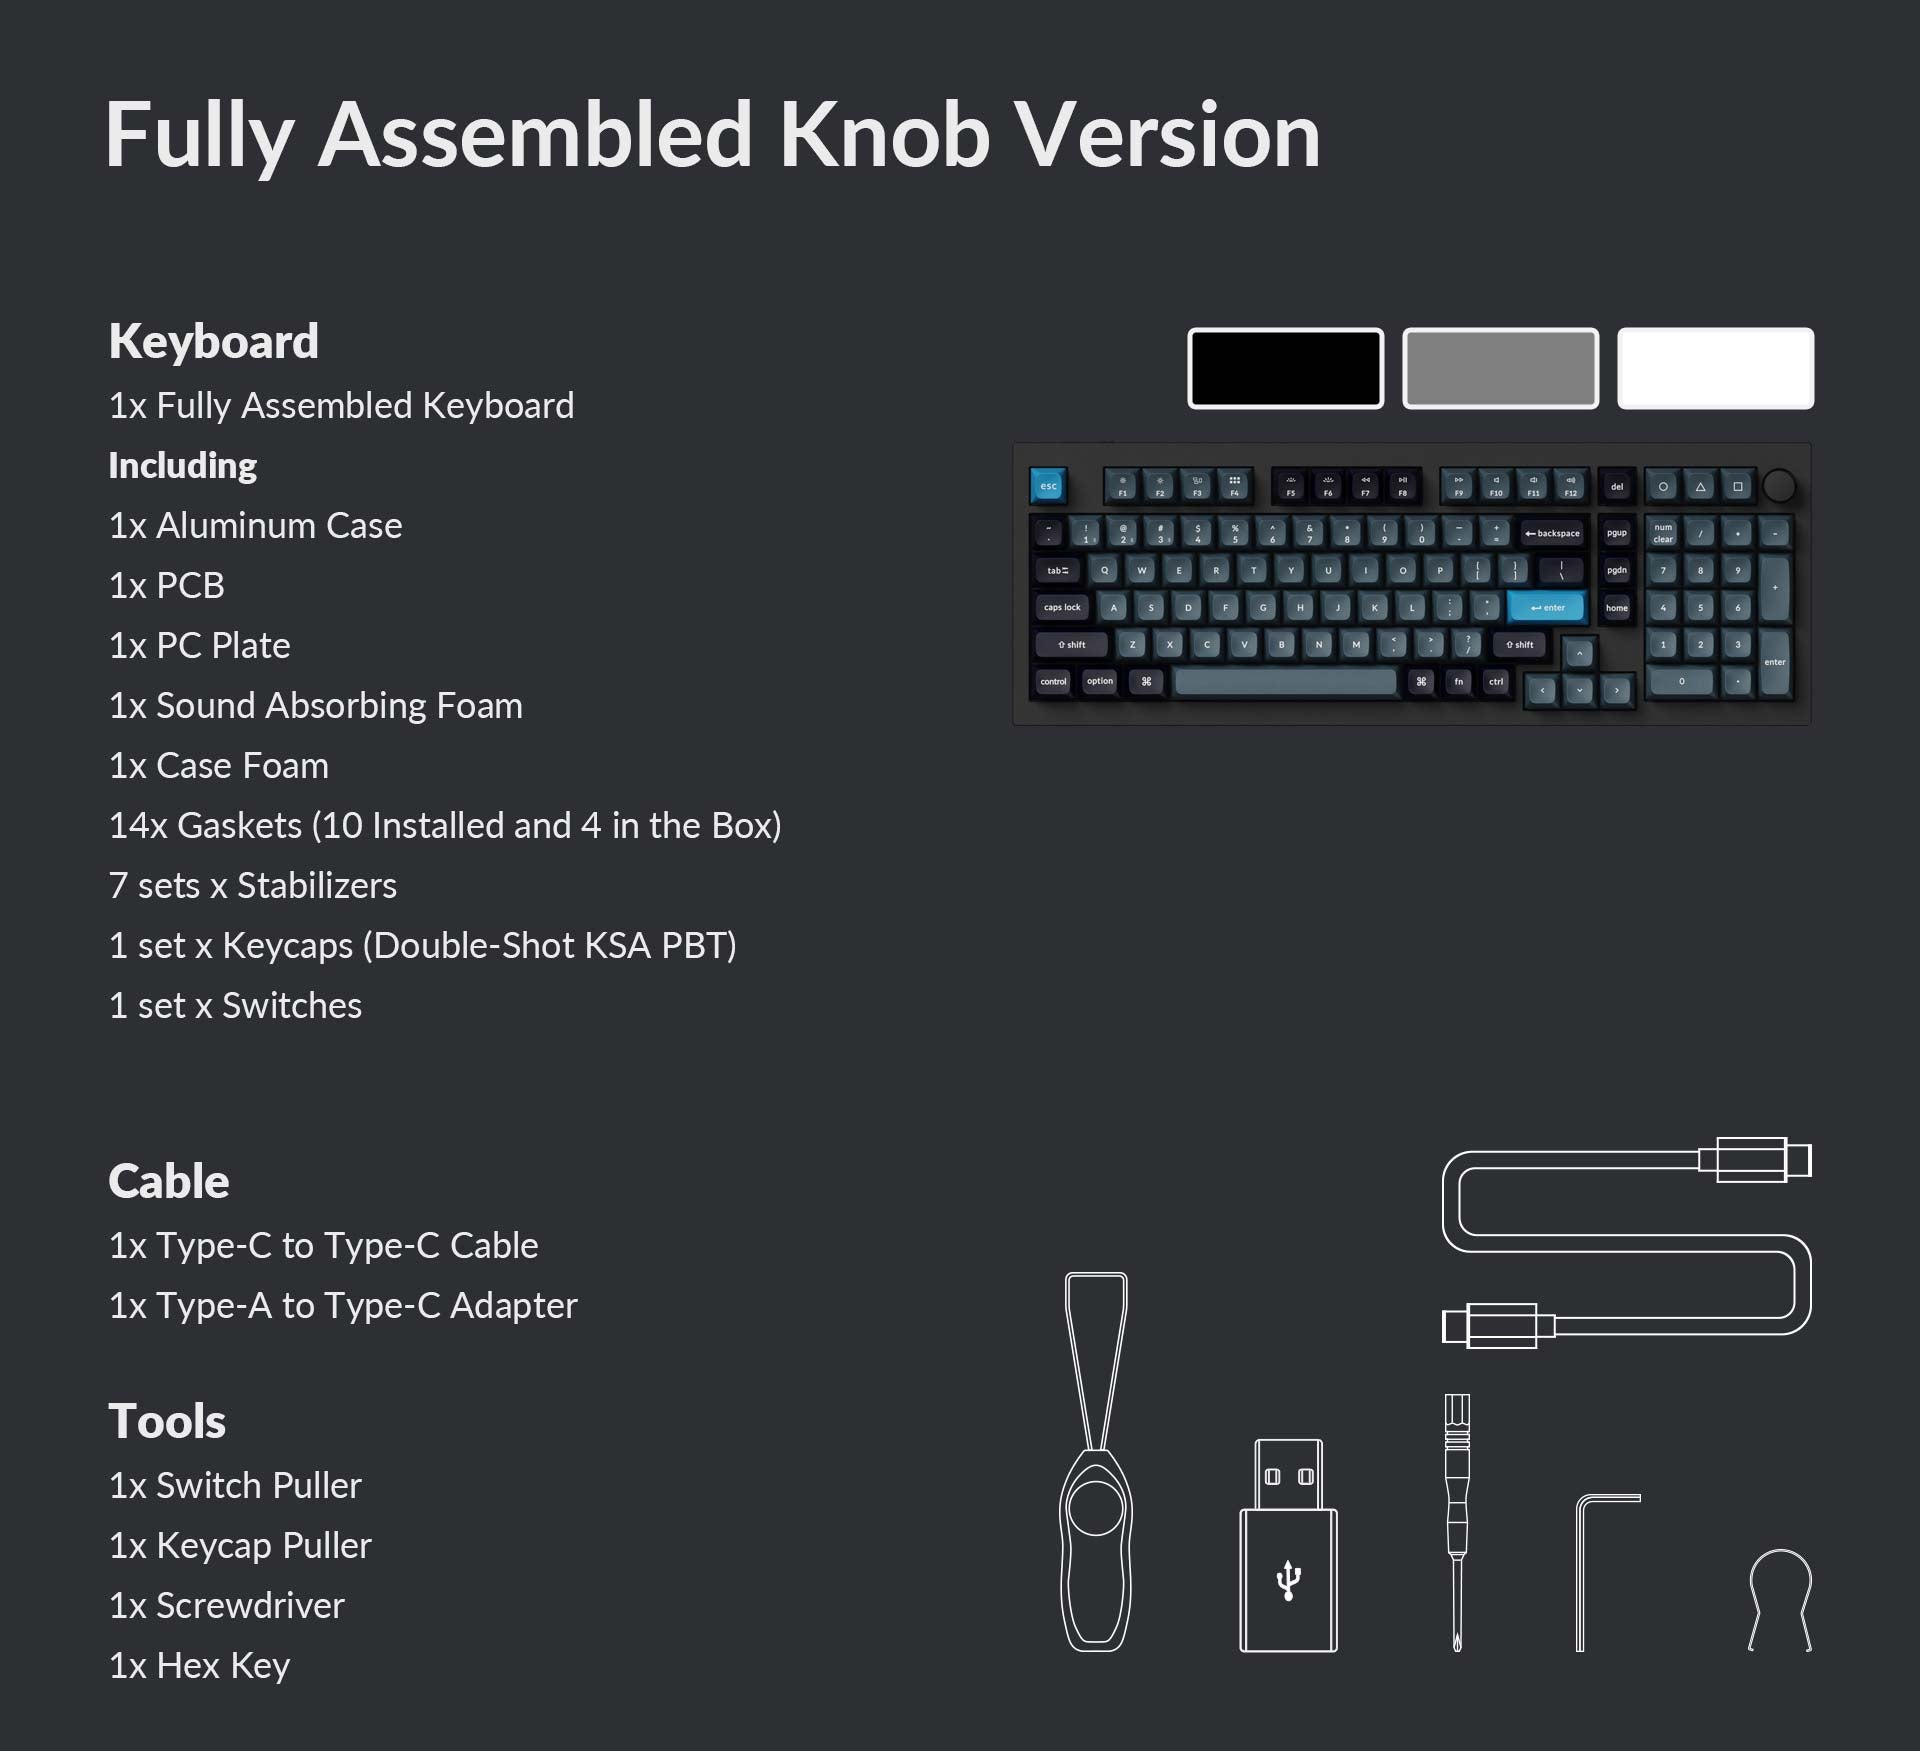 Package list of Keychron Q5 Pro fully assembled knob version